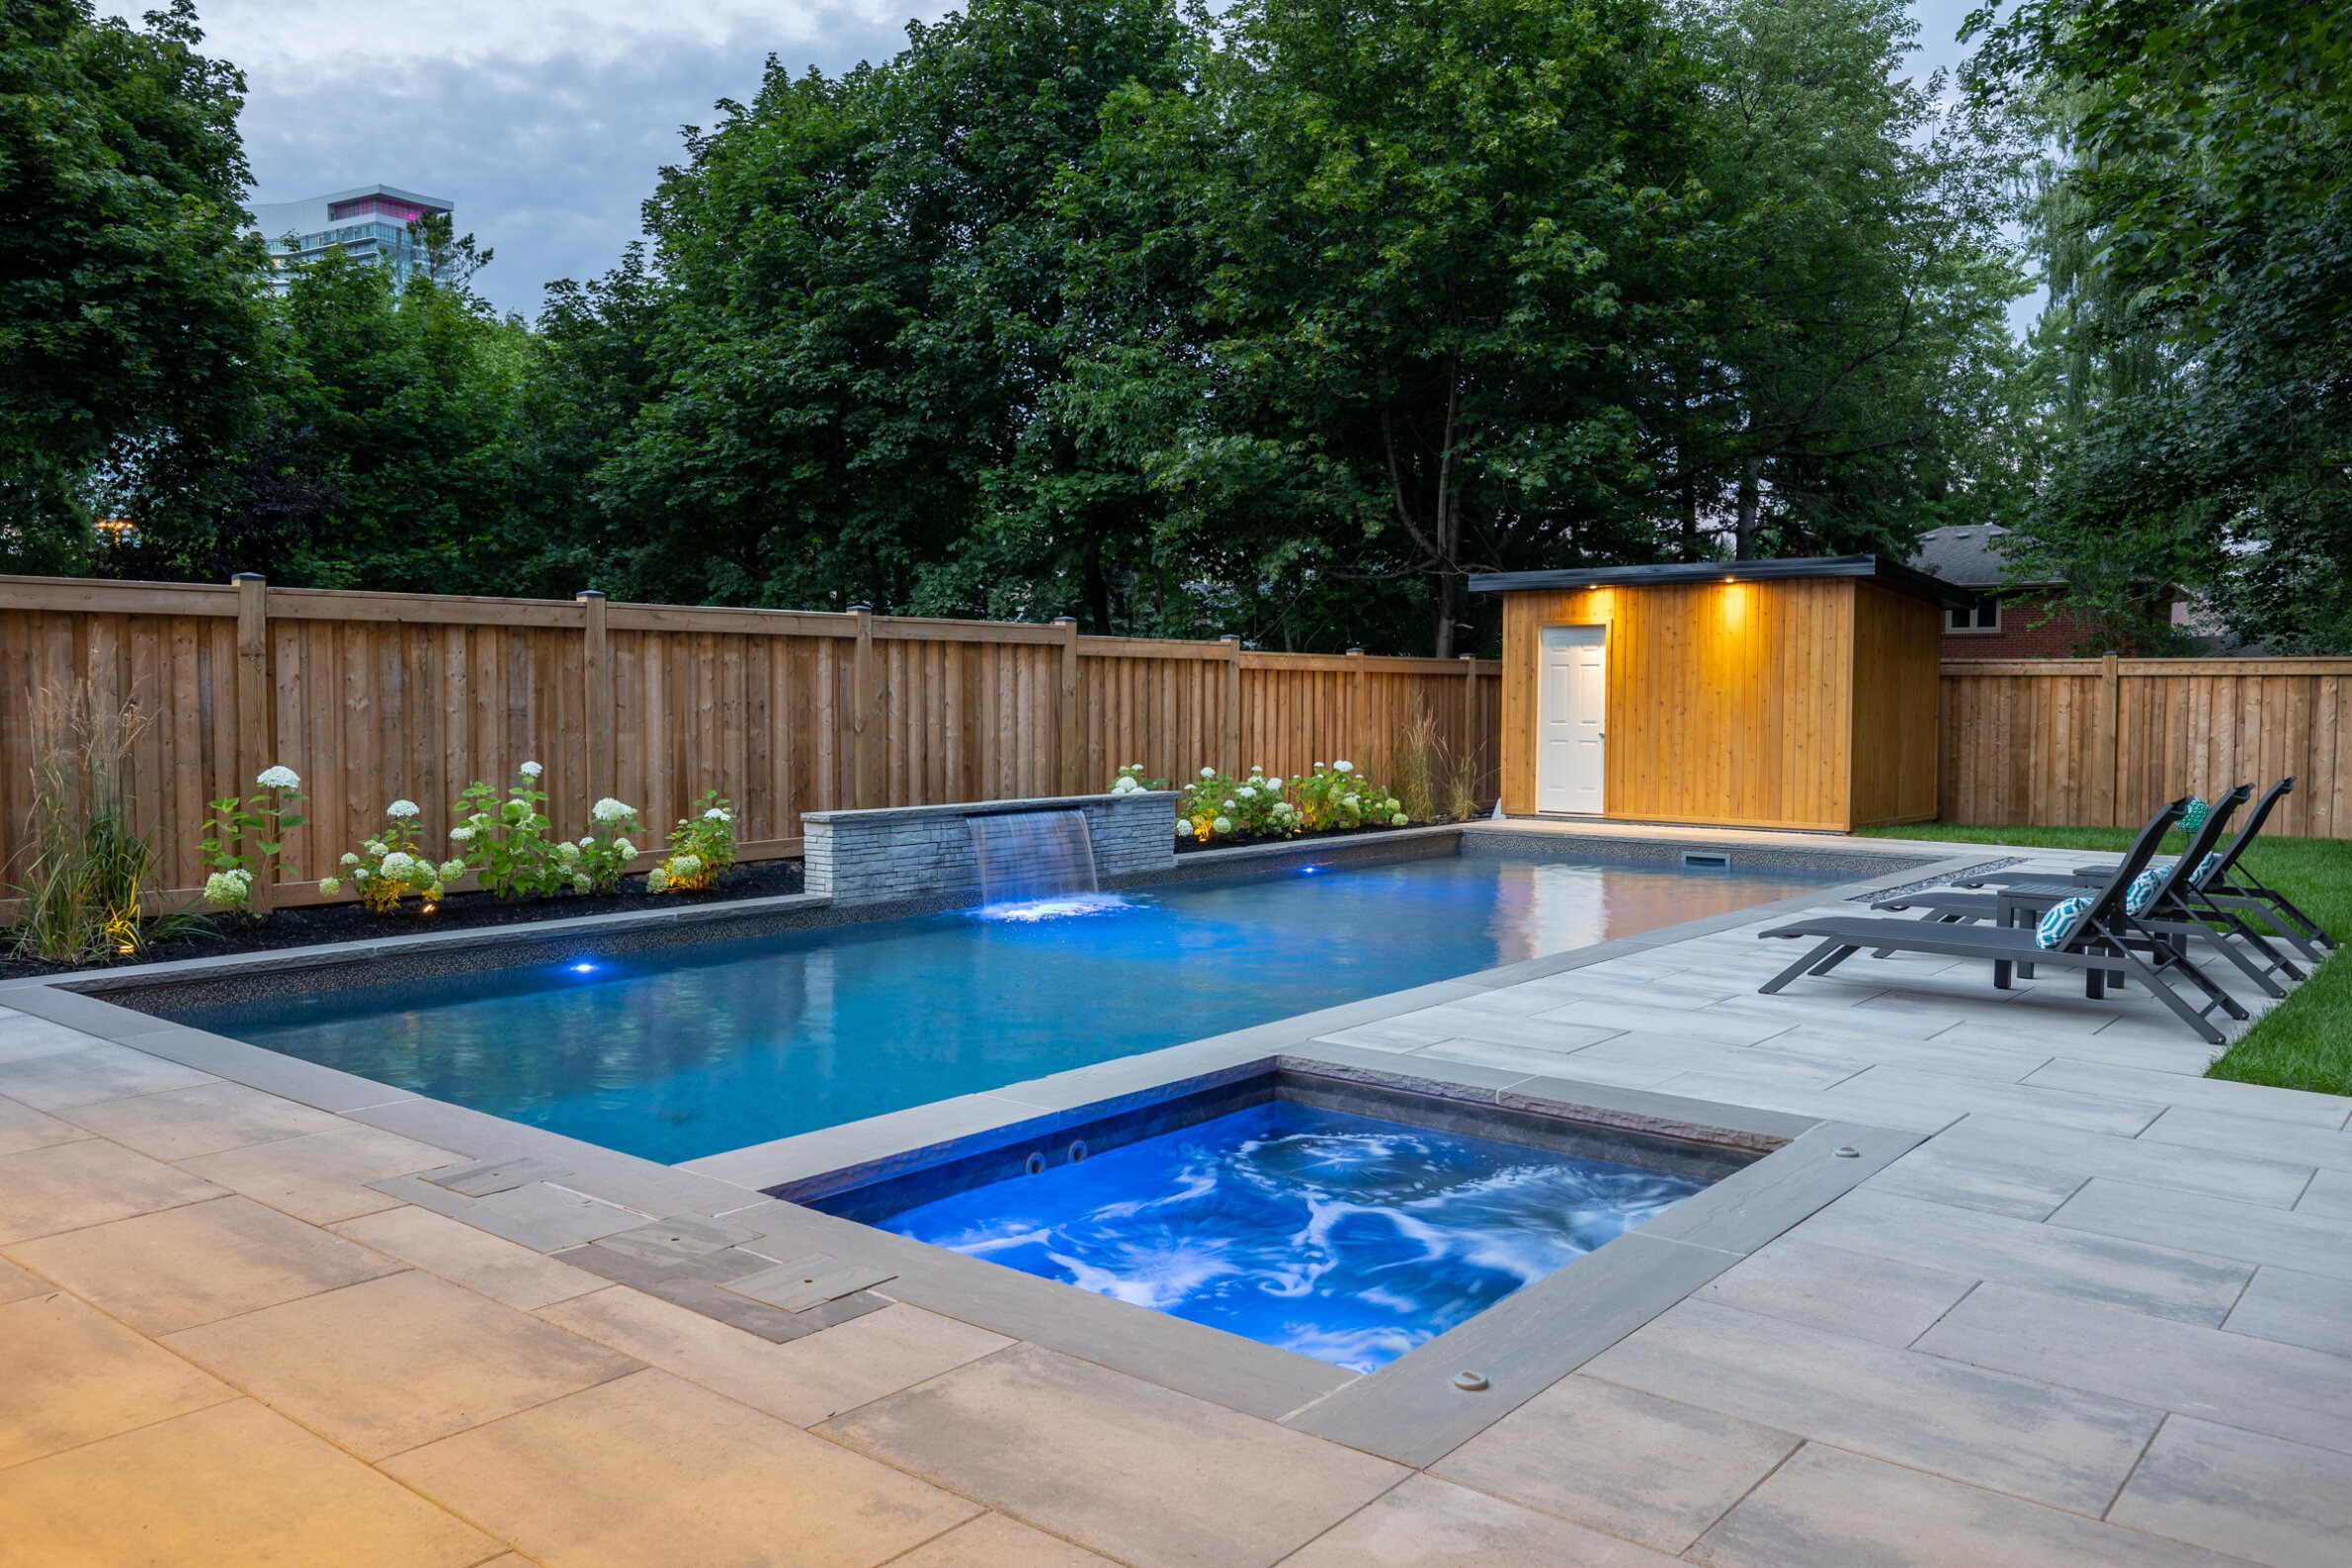 A serene backyard with a swimming pool and hot tub at dusk. Stone patio, wooden fence, greenery, and a small building with a lit interior.